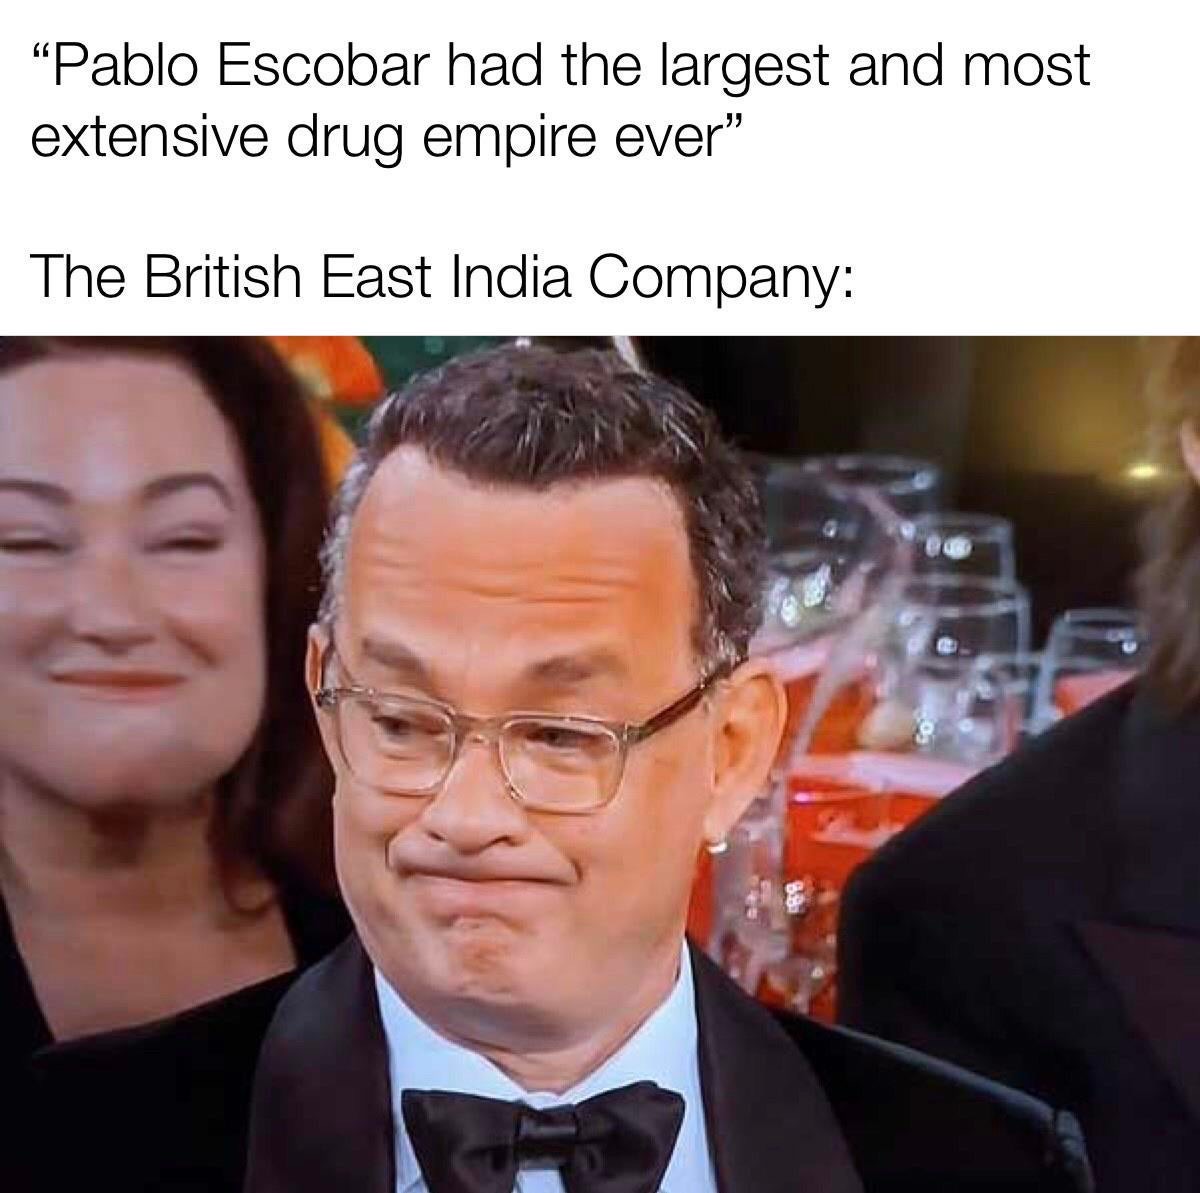 tom hanks ricky gervais memes - "Pablo Escobar had the largest and most extensive drug empire ever" The British East India Company